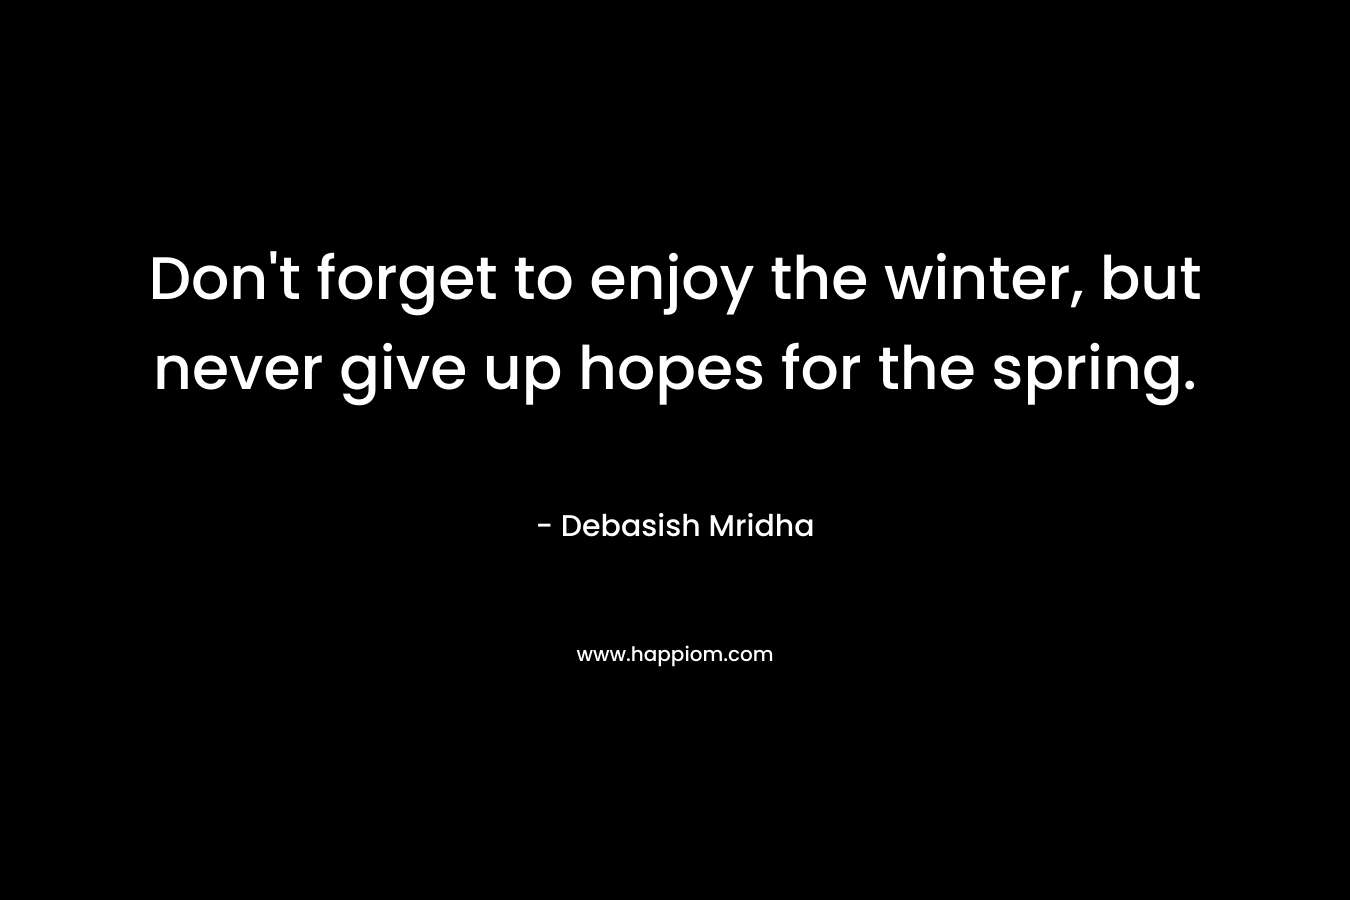 Don't forget to enjoy the winter, but never give up hopes for the spring.